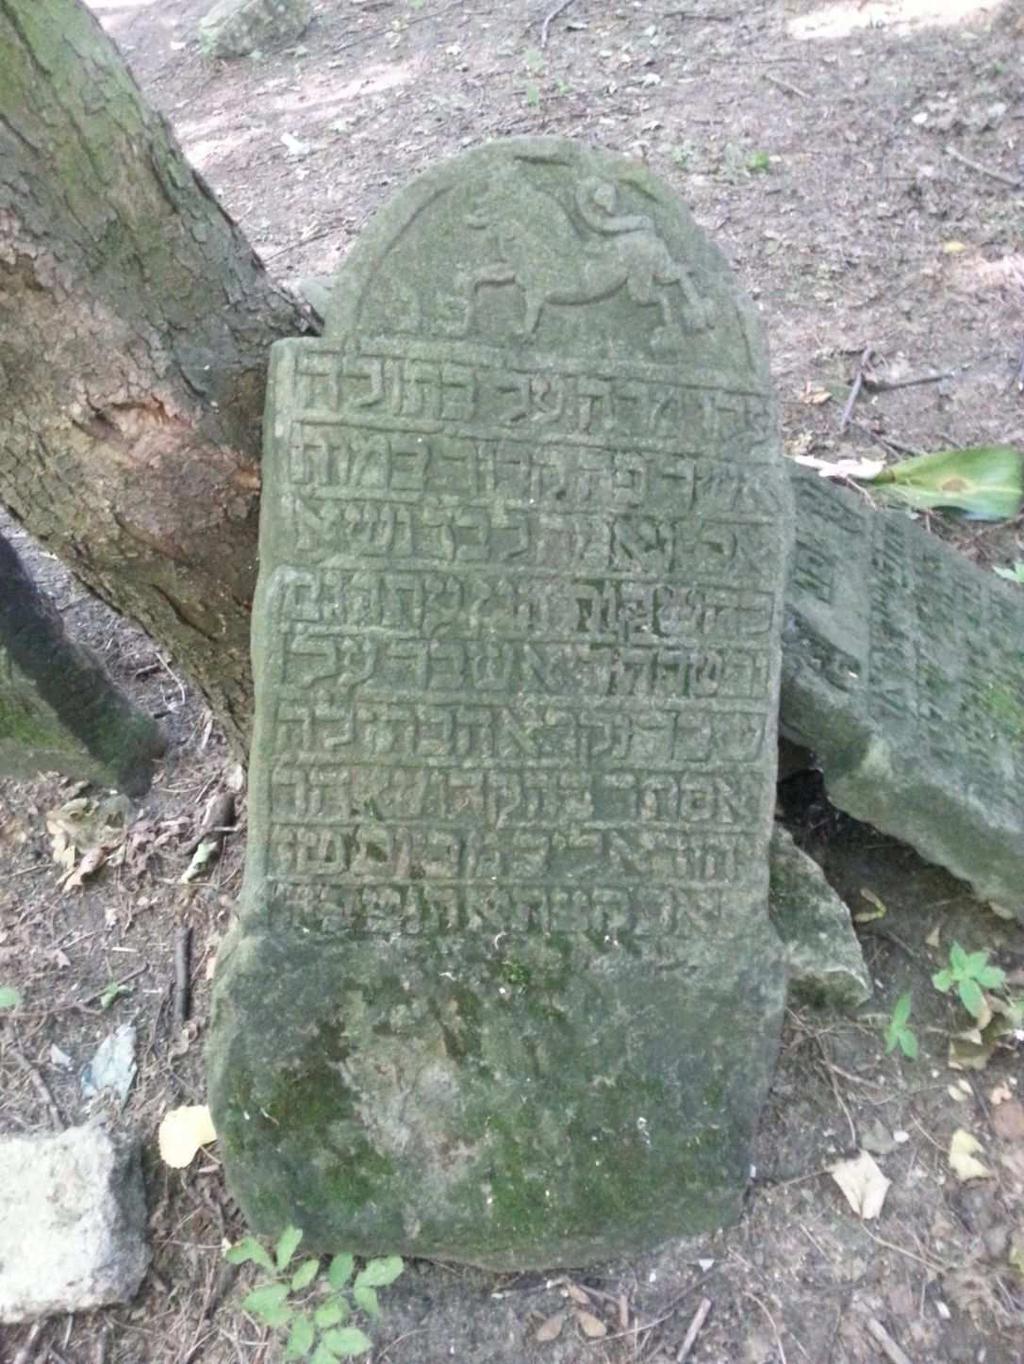 Last month, the Polish parliament approved allocating 100 million Polish zlotys (about 100 million shekels) to restore the Warsaw Jewish Cemetery.